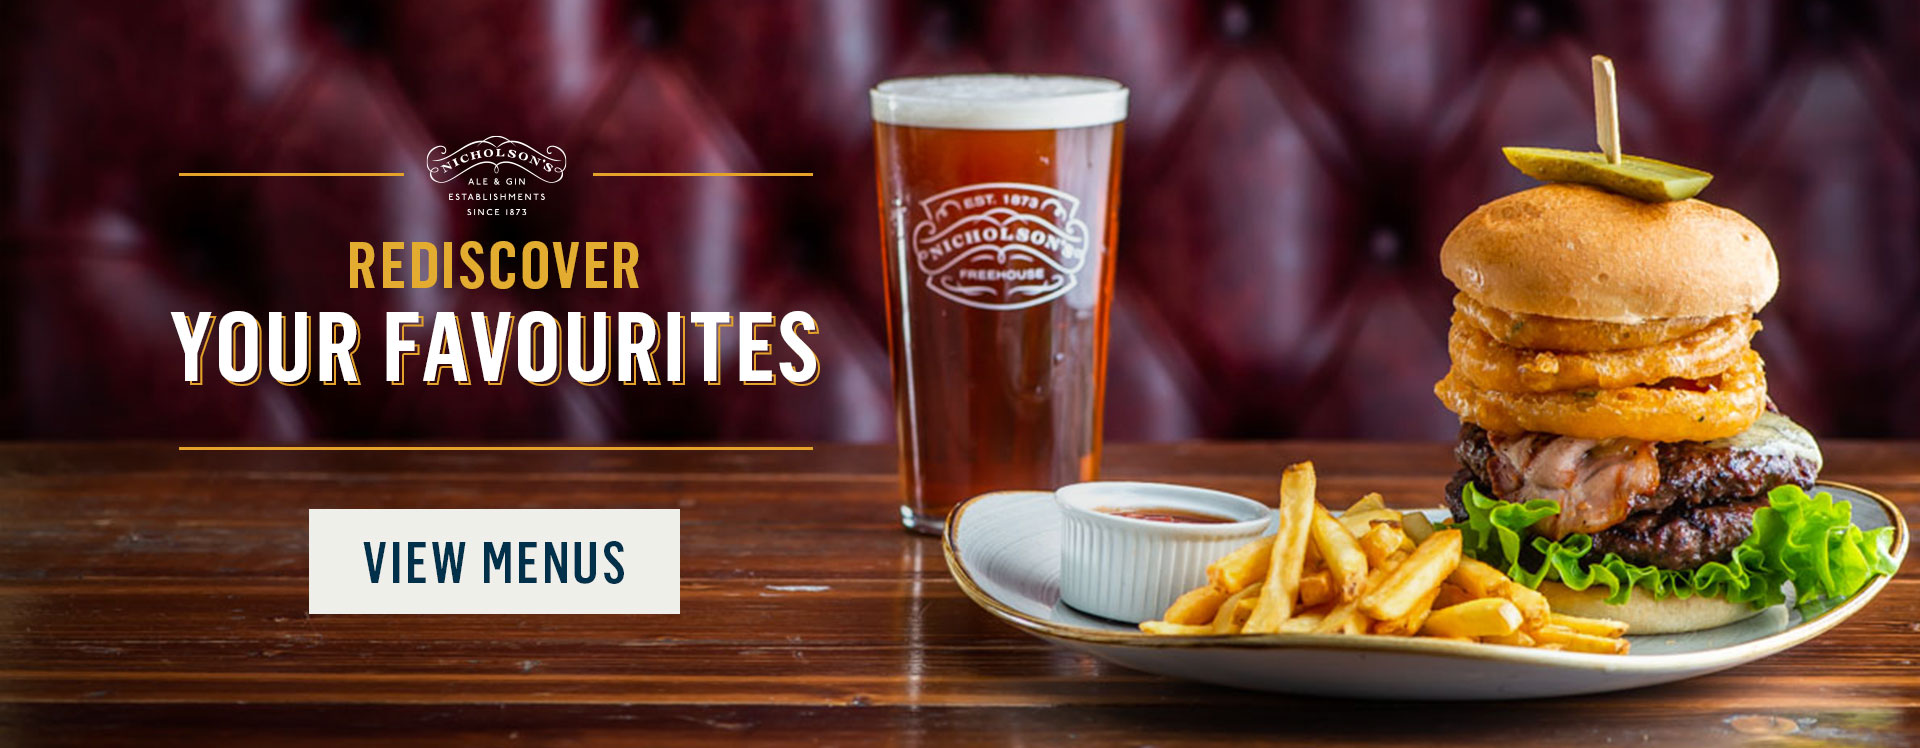 Rediscover your favourites at Marquis Of Granby, Westminster